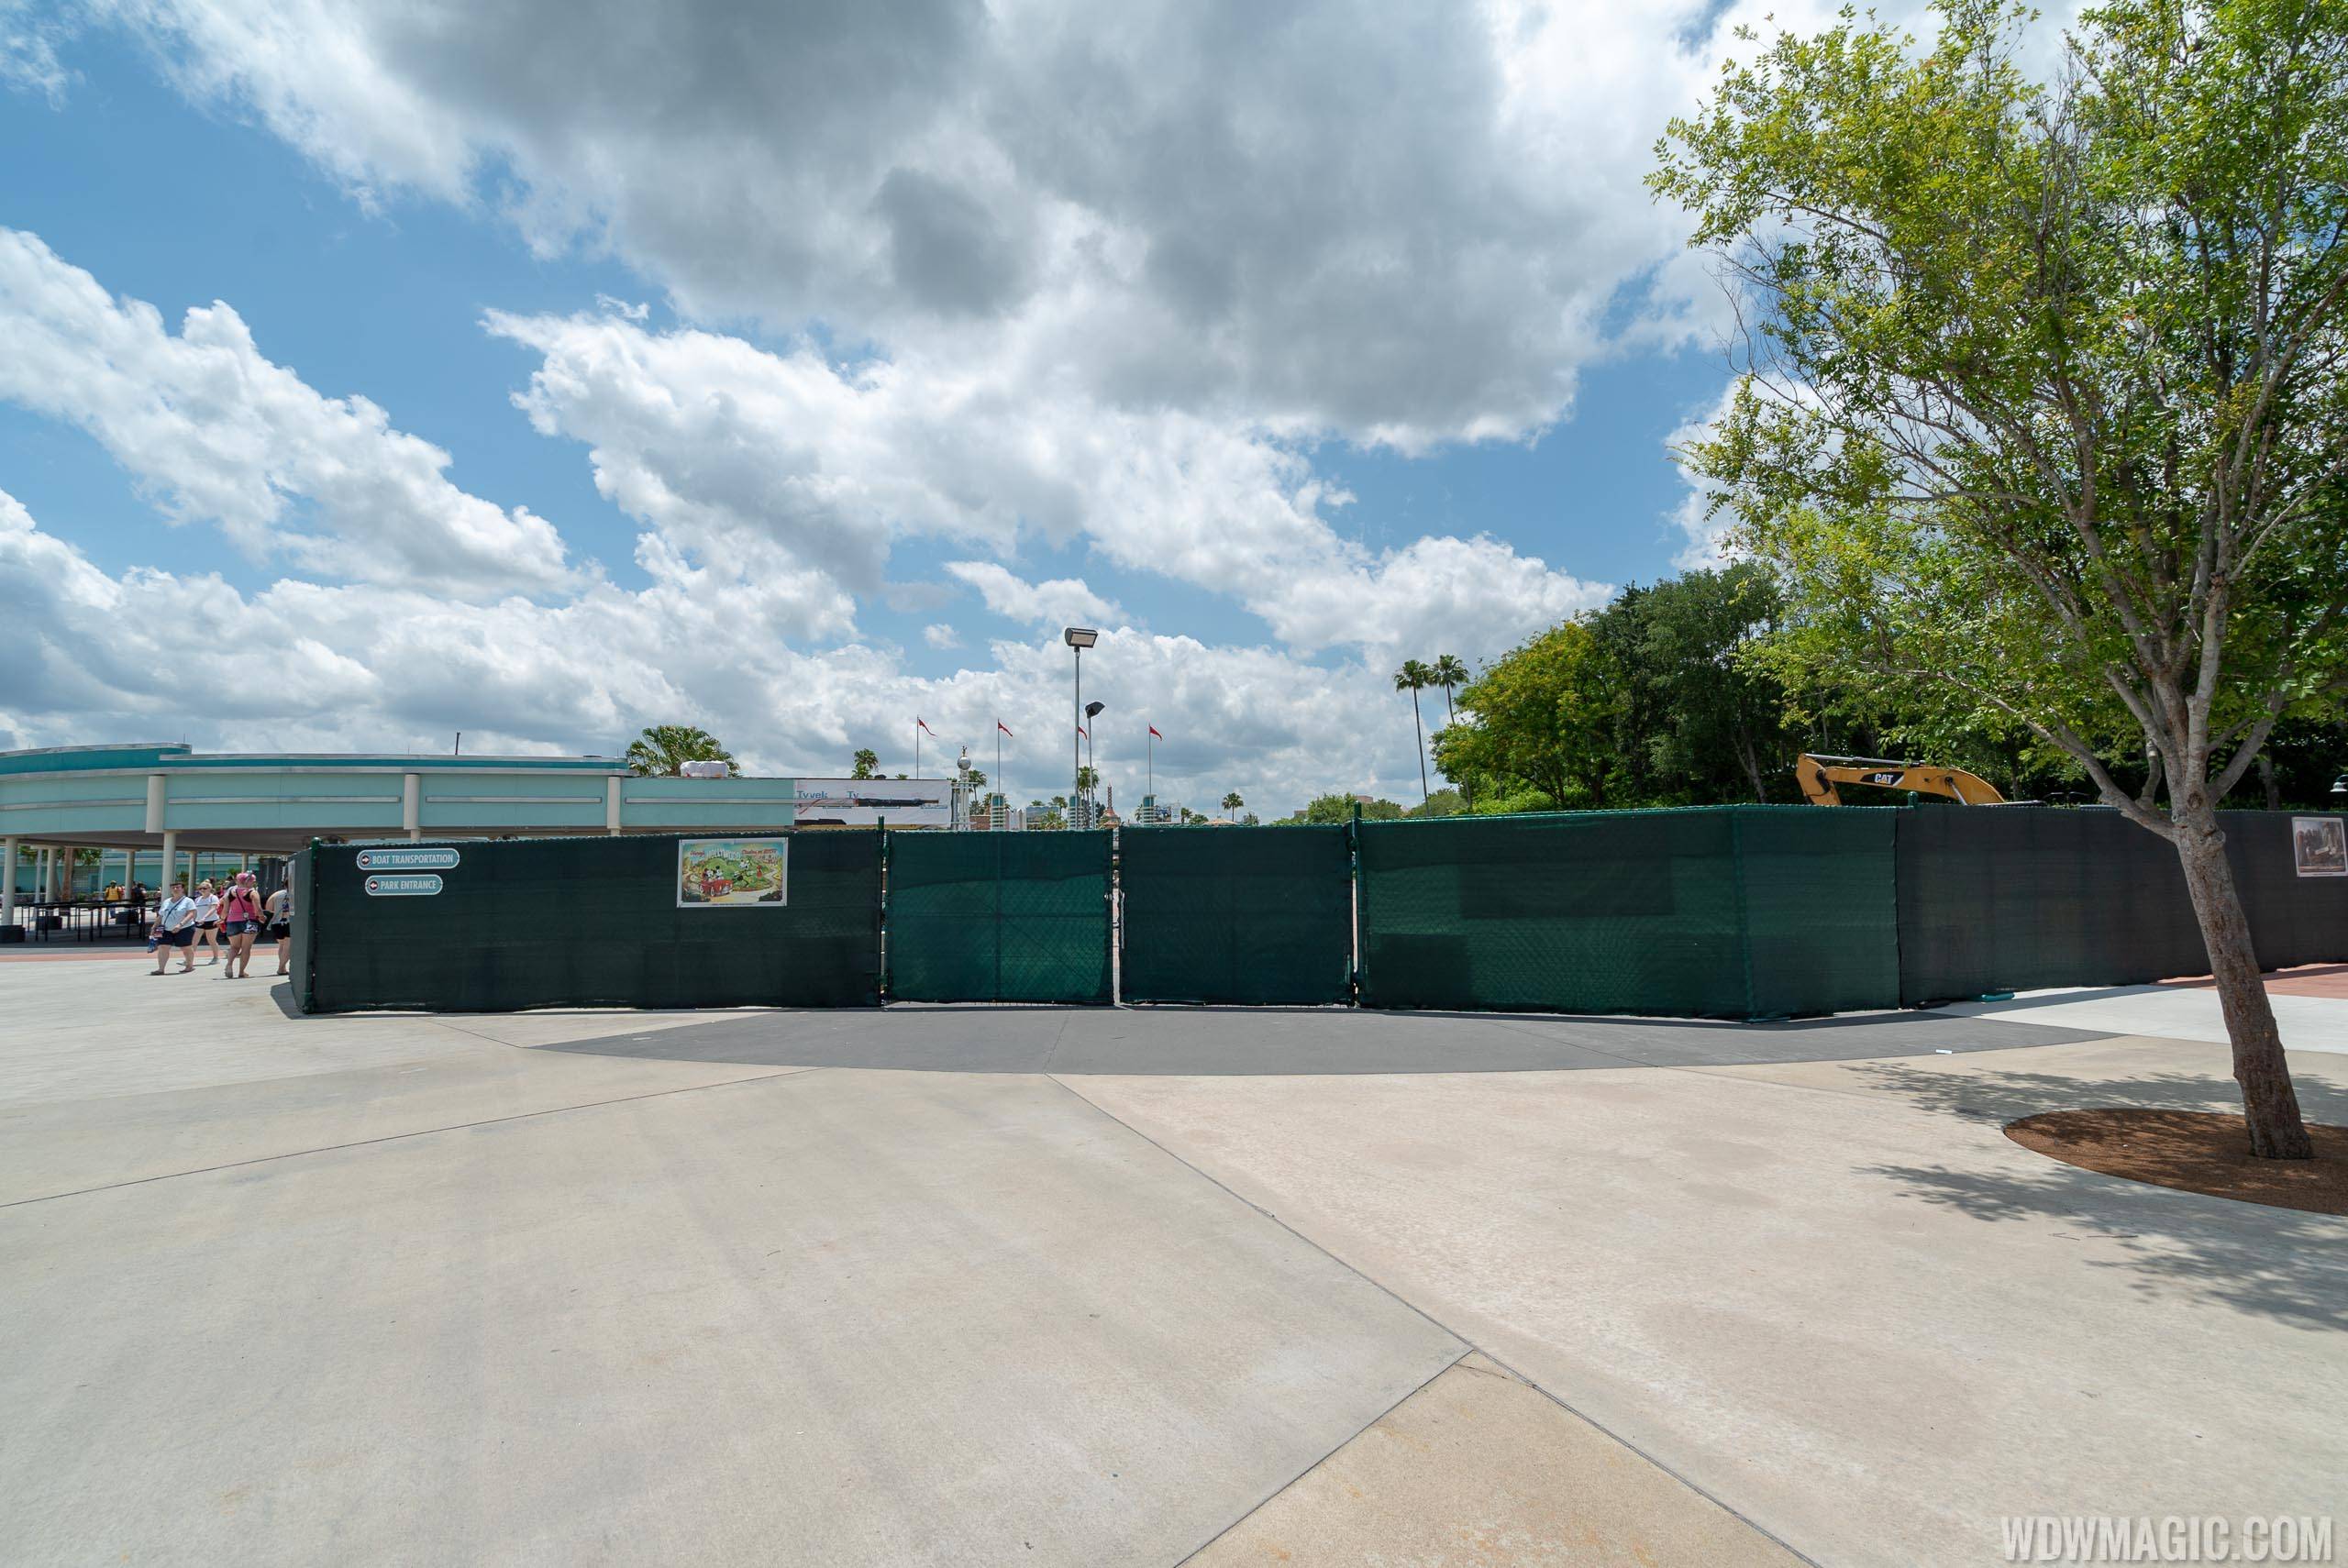 New Tram load area completed at Disney's Hollywood Studios